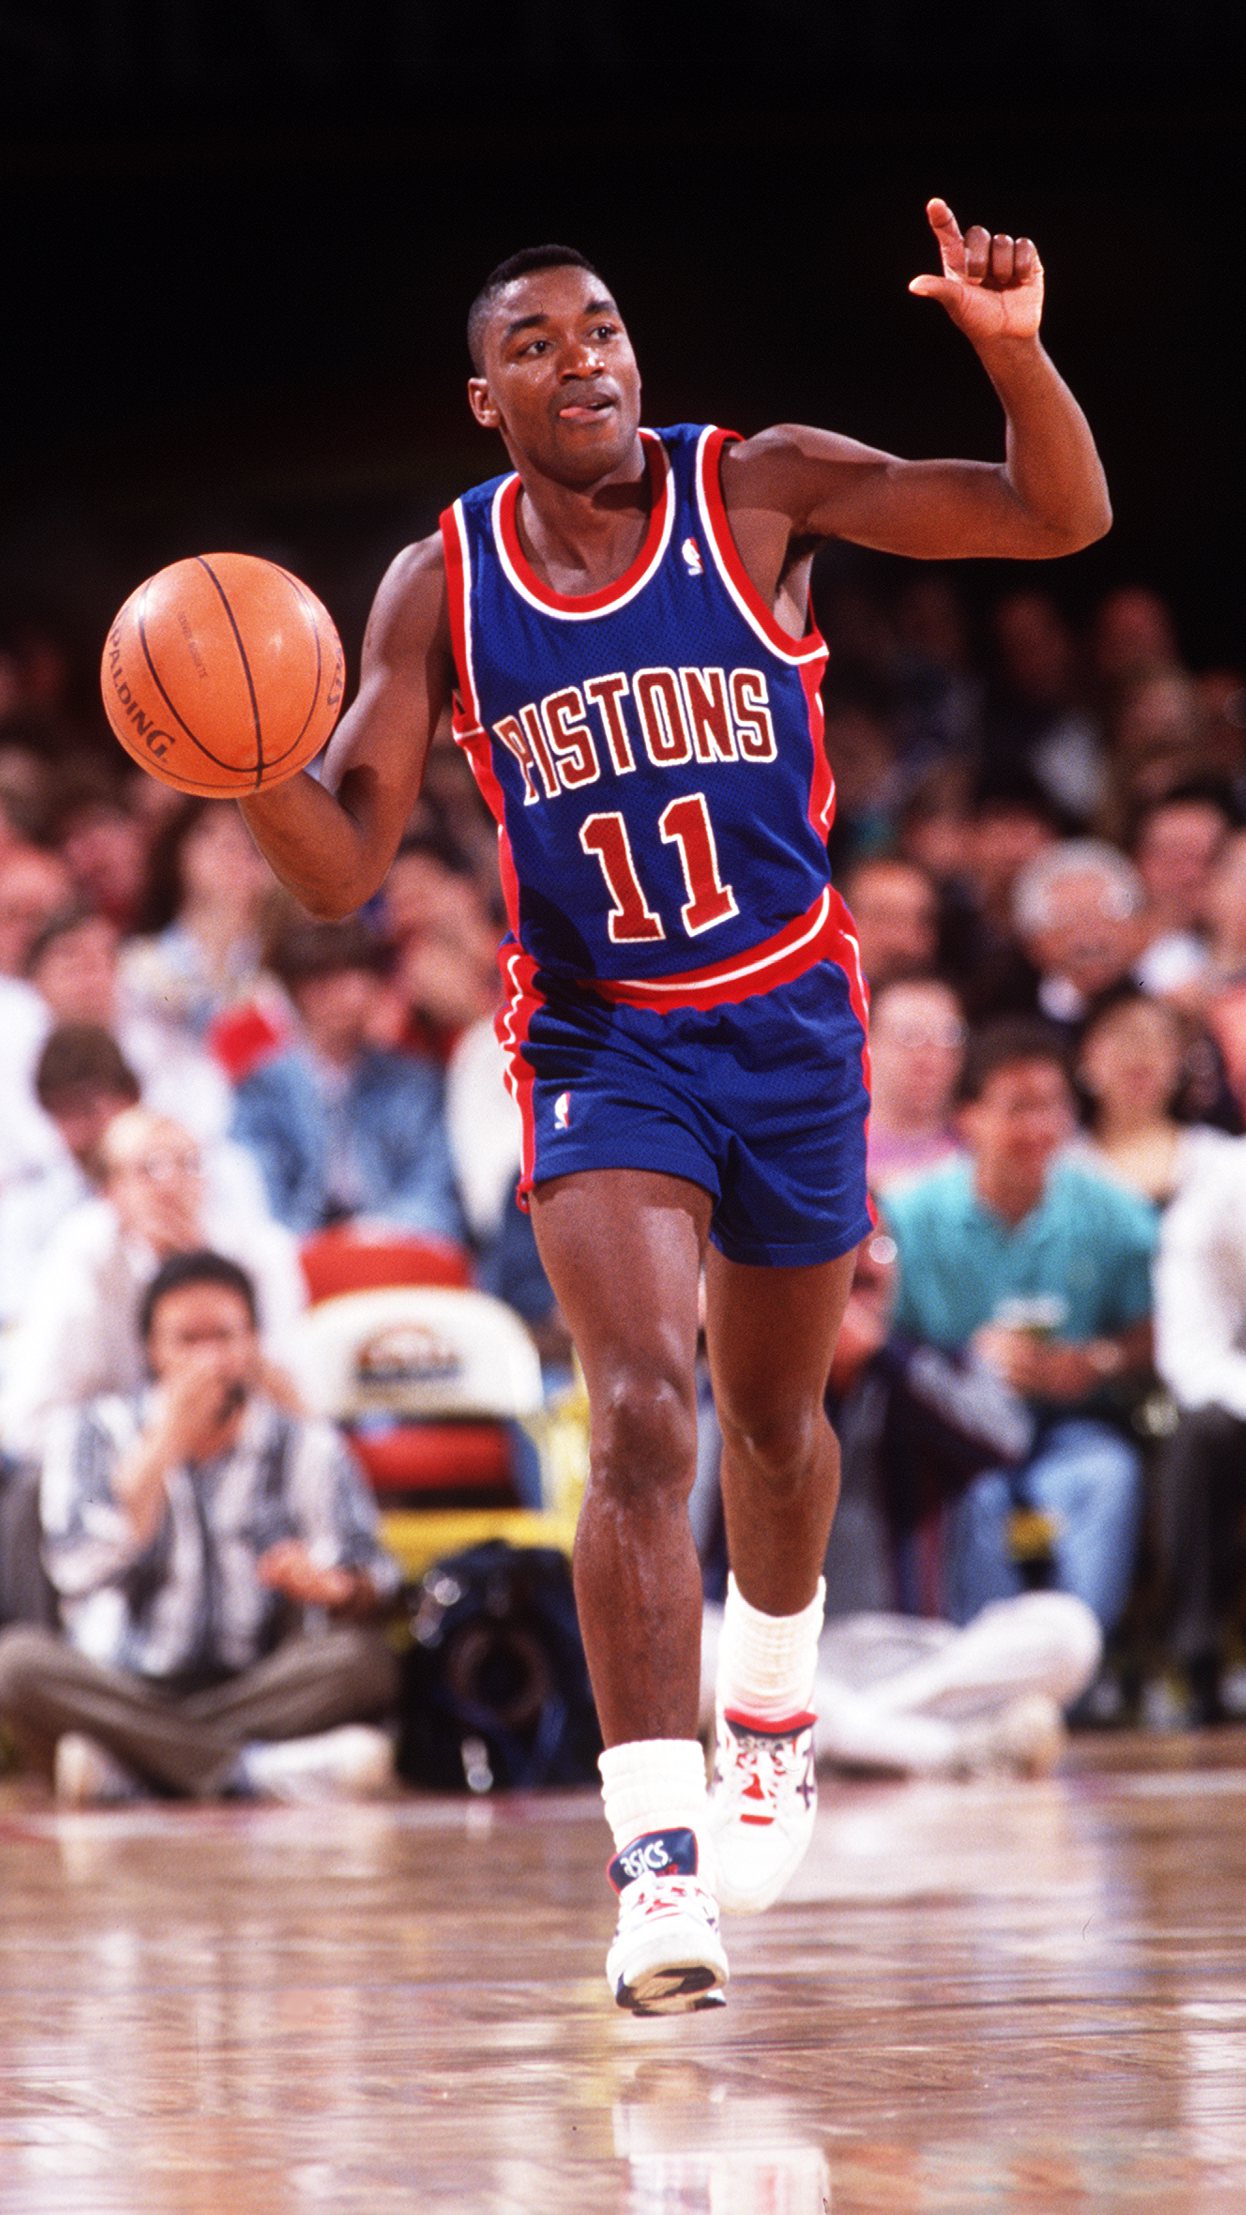 11 May 1994: DETROIT POINT GUARD ISIAH THOMAS DRIBBLES THE BALL WHILE CALLING AN OFFENSE DURING THE PISTONS GAME AT THE DENVER NUGGETS.